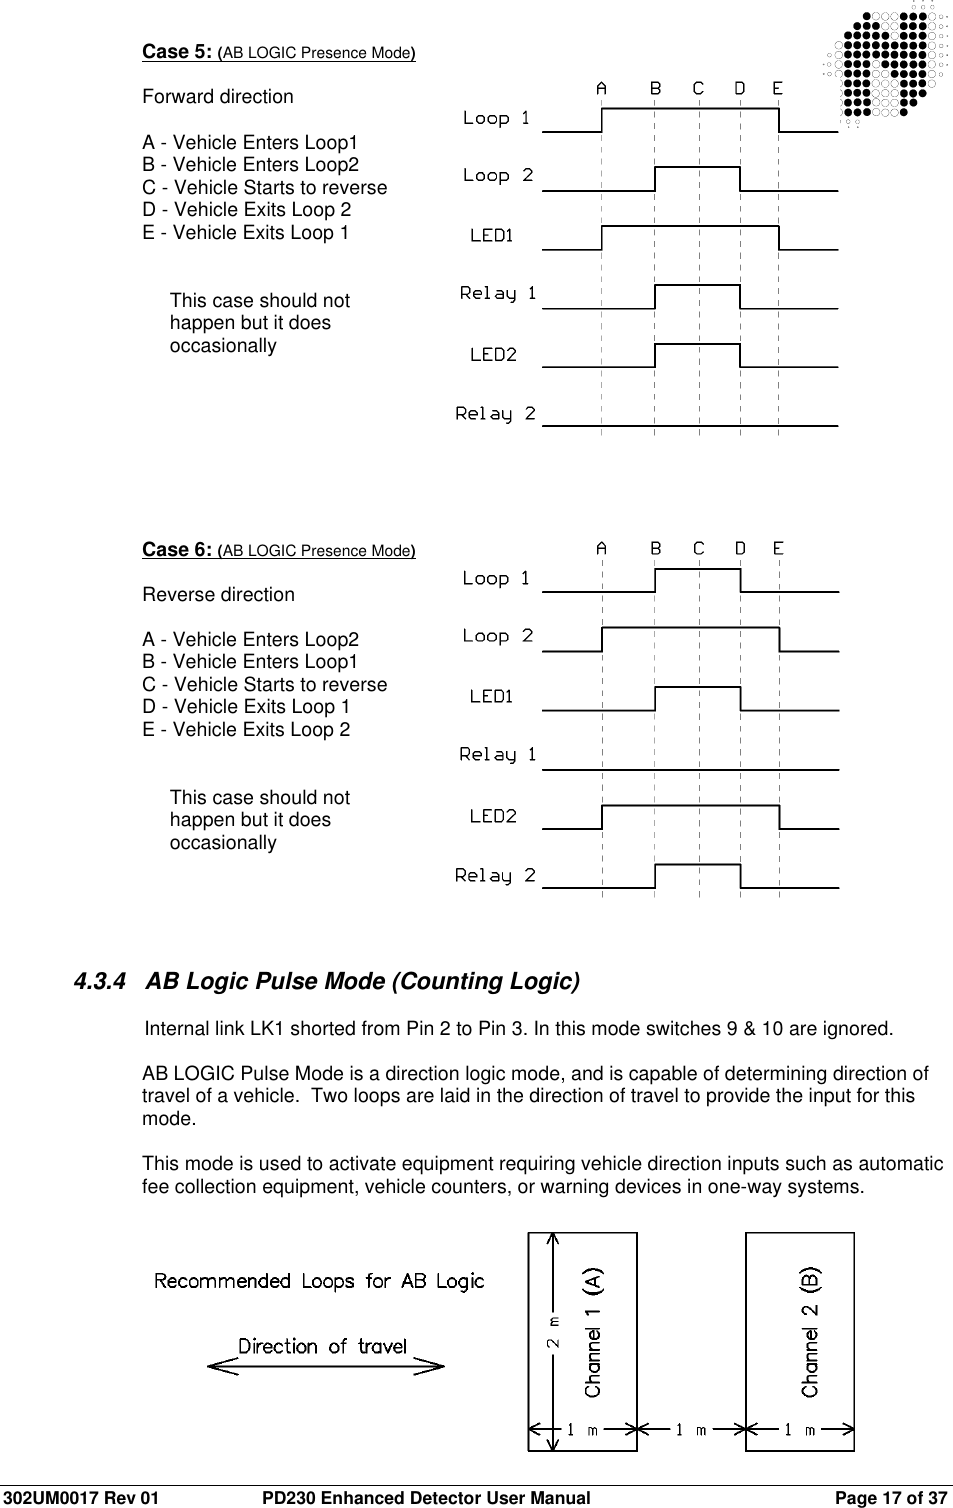  302UM0017 Rev 01  PD230 Enhanced Detector User Manual   Page 17 of 37 Case 5: (AB LOGIC Presence Mode)  Forward direction  A - Vehicle Enters Loop1 B - Vehicle Enters Loop2 C - Vehicle Starts to reverse D - Vehicle Exits Loop 2 E - Vehicle Exits Loop 1   This case should not  happen but it does  occasionally         Case 6: (AB LOGIC Presence Mode)  Reverse direction  A - Vehicle Enters Loop2 B - Vehicle Enters Loop1 C - Vehicle Starts to reverse D - Vehicle Exits Loop 1 E - Vehicle Exits Loop 2   This case should not  happen but it does  occasionally      4.3.4  AB Logic Pulse Mode (Counting Logic)    Internal link LK1 shorted from Pin 2 to Pin 3. In this mode switches 9 &amp; 10 are ignored.  AB LOGIC Pulse Mode is a direction logic mode, and is capable of determining direction of travel of a vehicle.  Two loops are laid in the direction of travel to provide the input for this mode.  This mode is used to activate equipment requiring vehicle direction inputs such as automatic fee collection equipment, vehicle counters, or warning devices in one-way systems.            